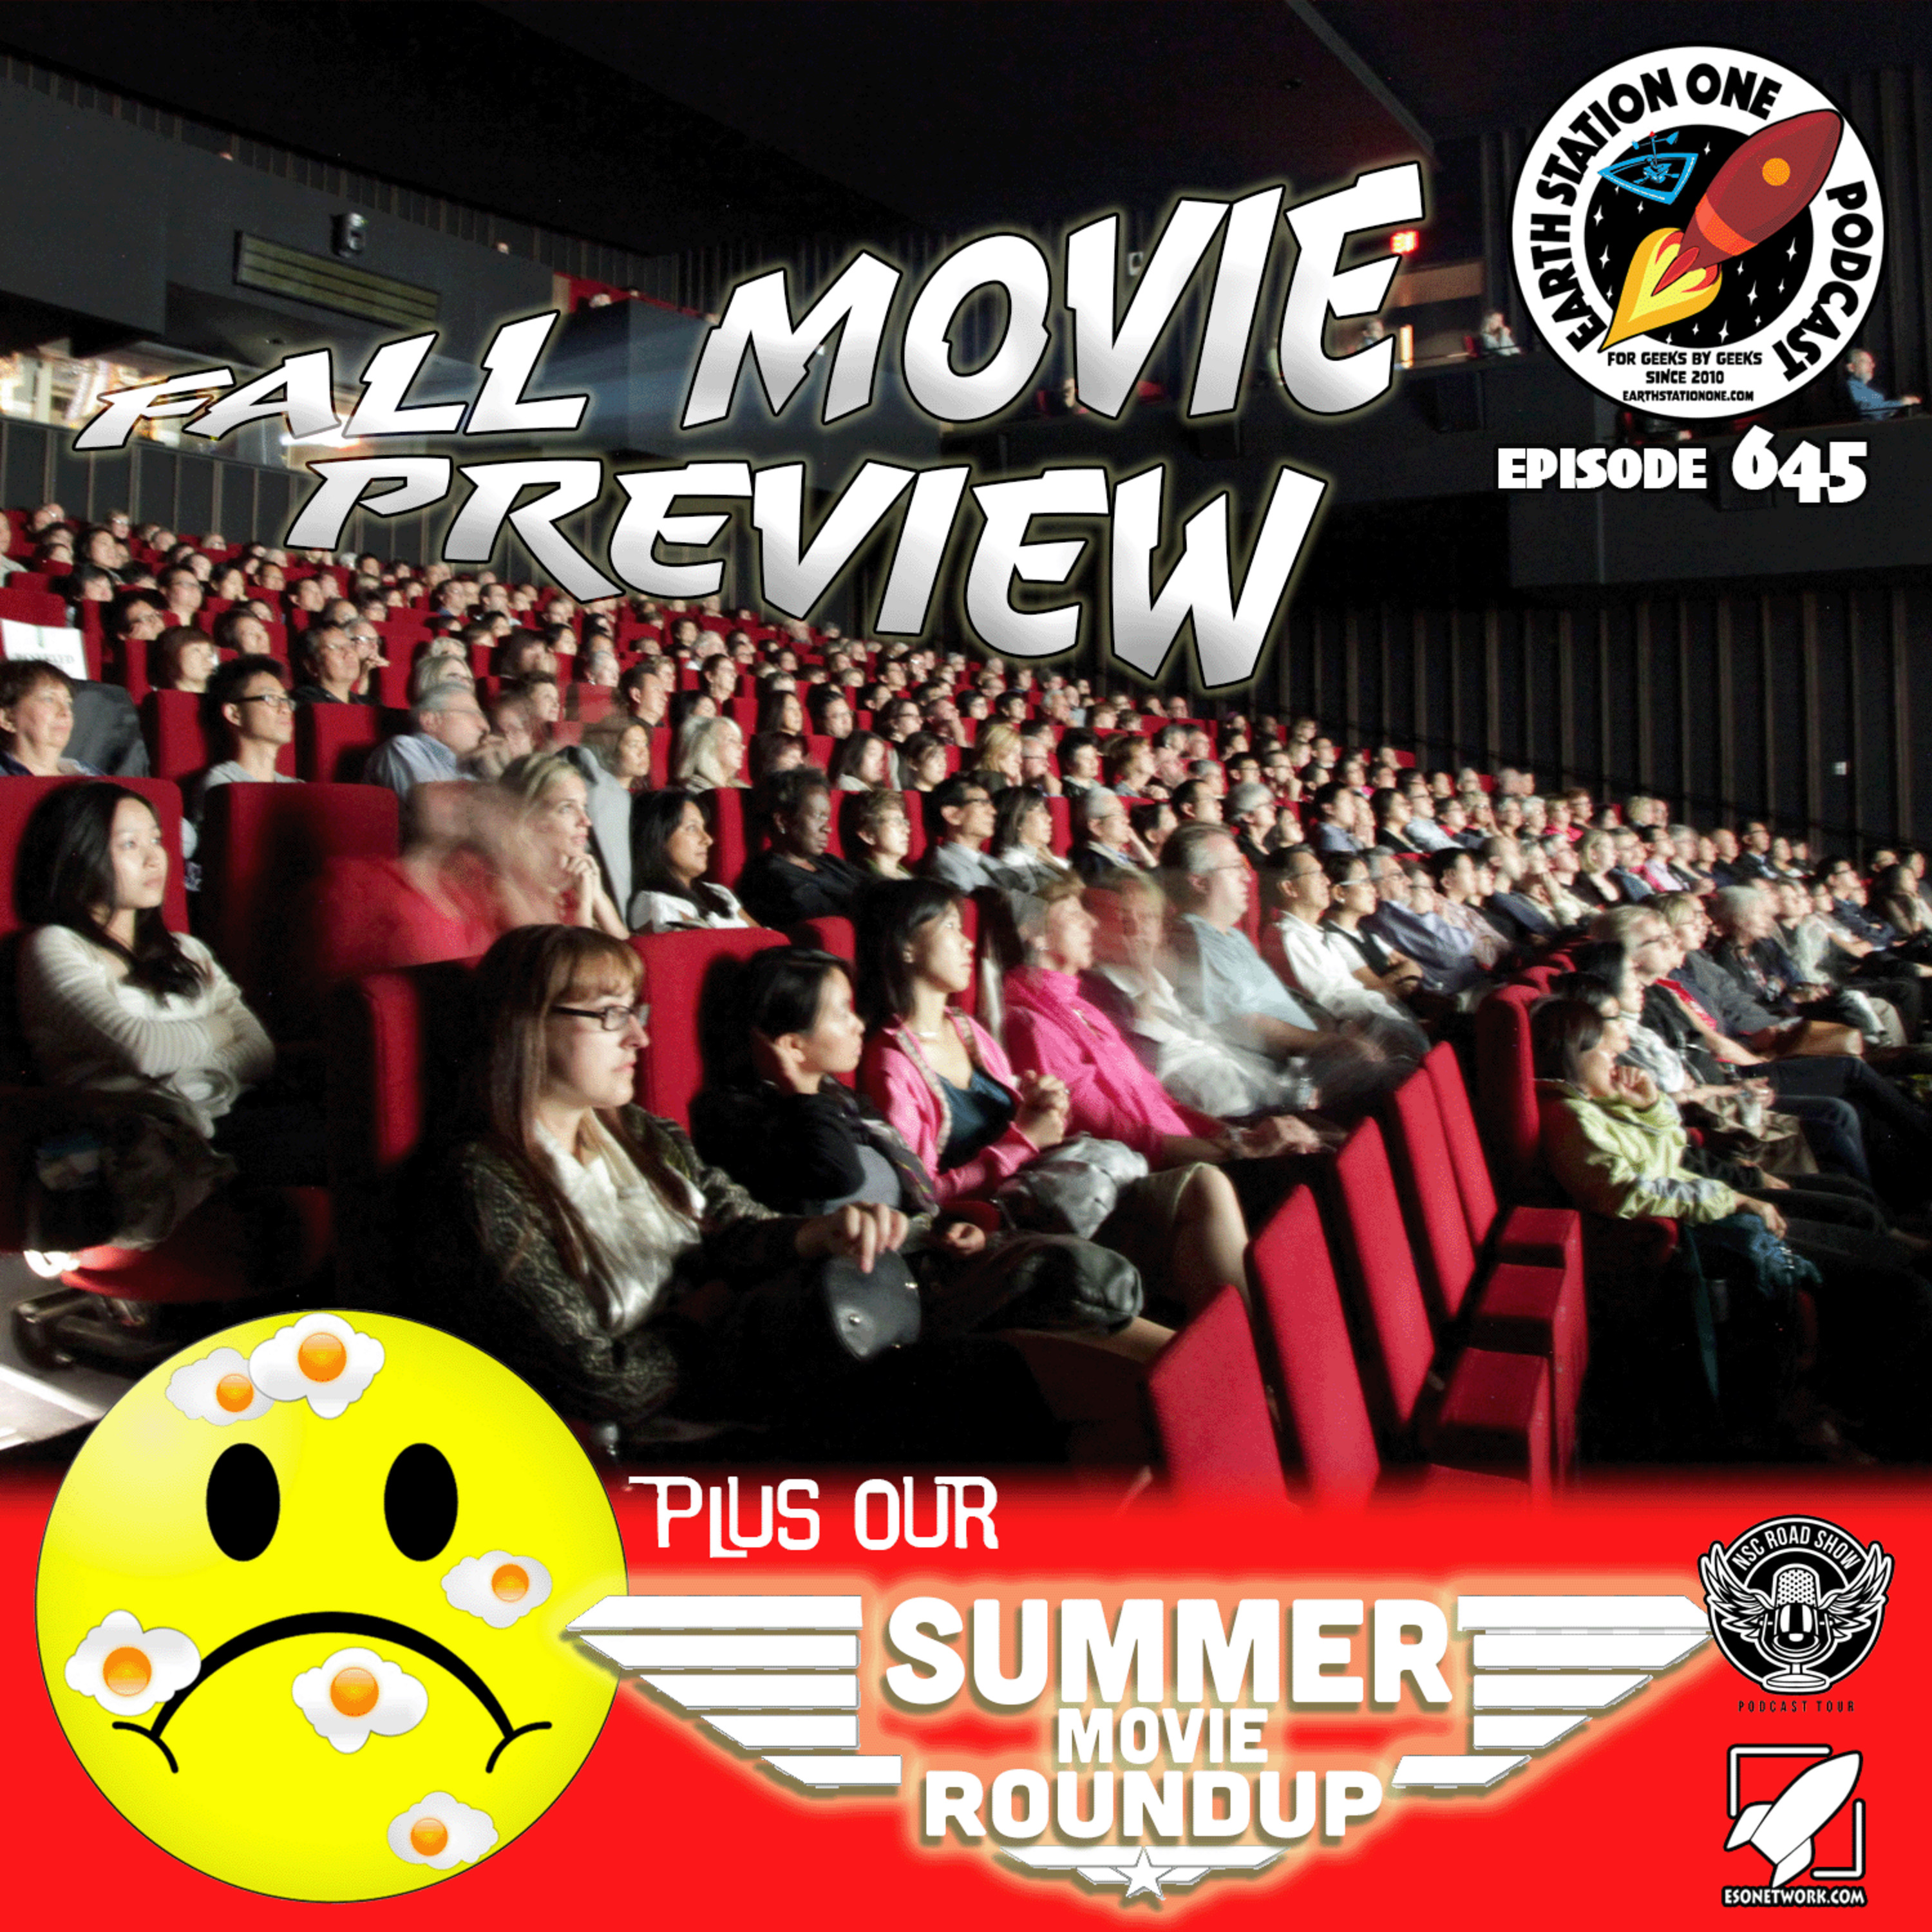 The Earth Station One Podcast - Summer Movie Roundup  / Fall and Winter Movie Preview